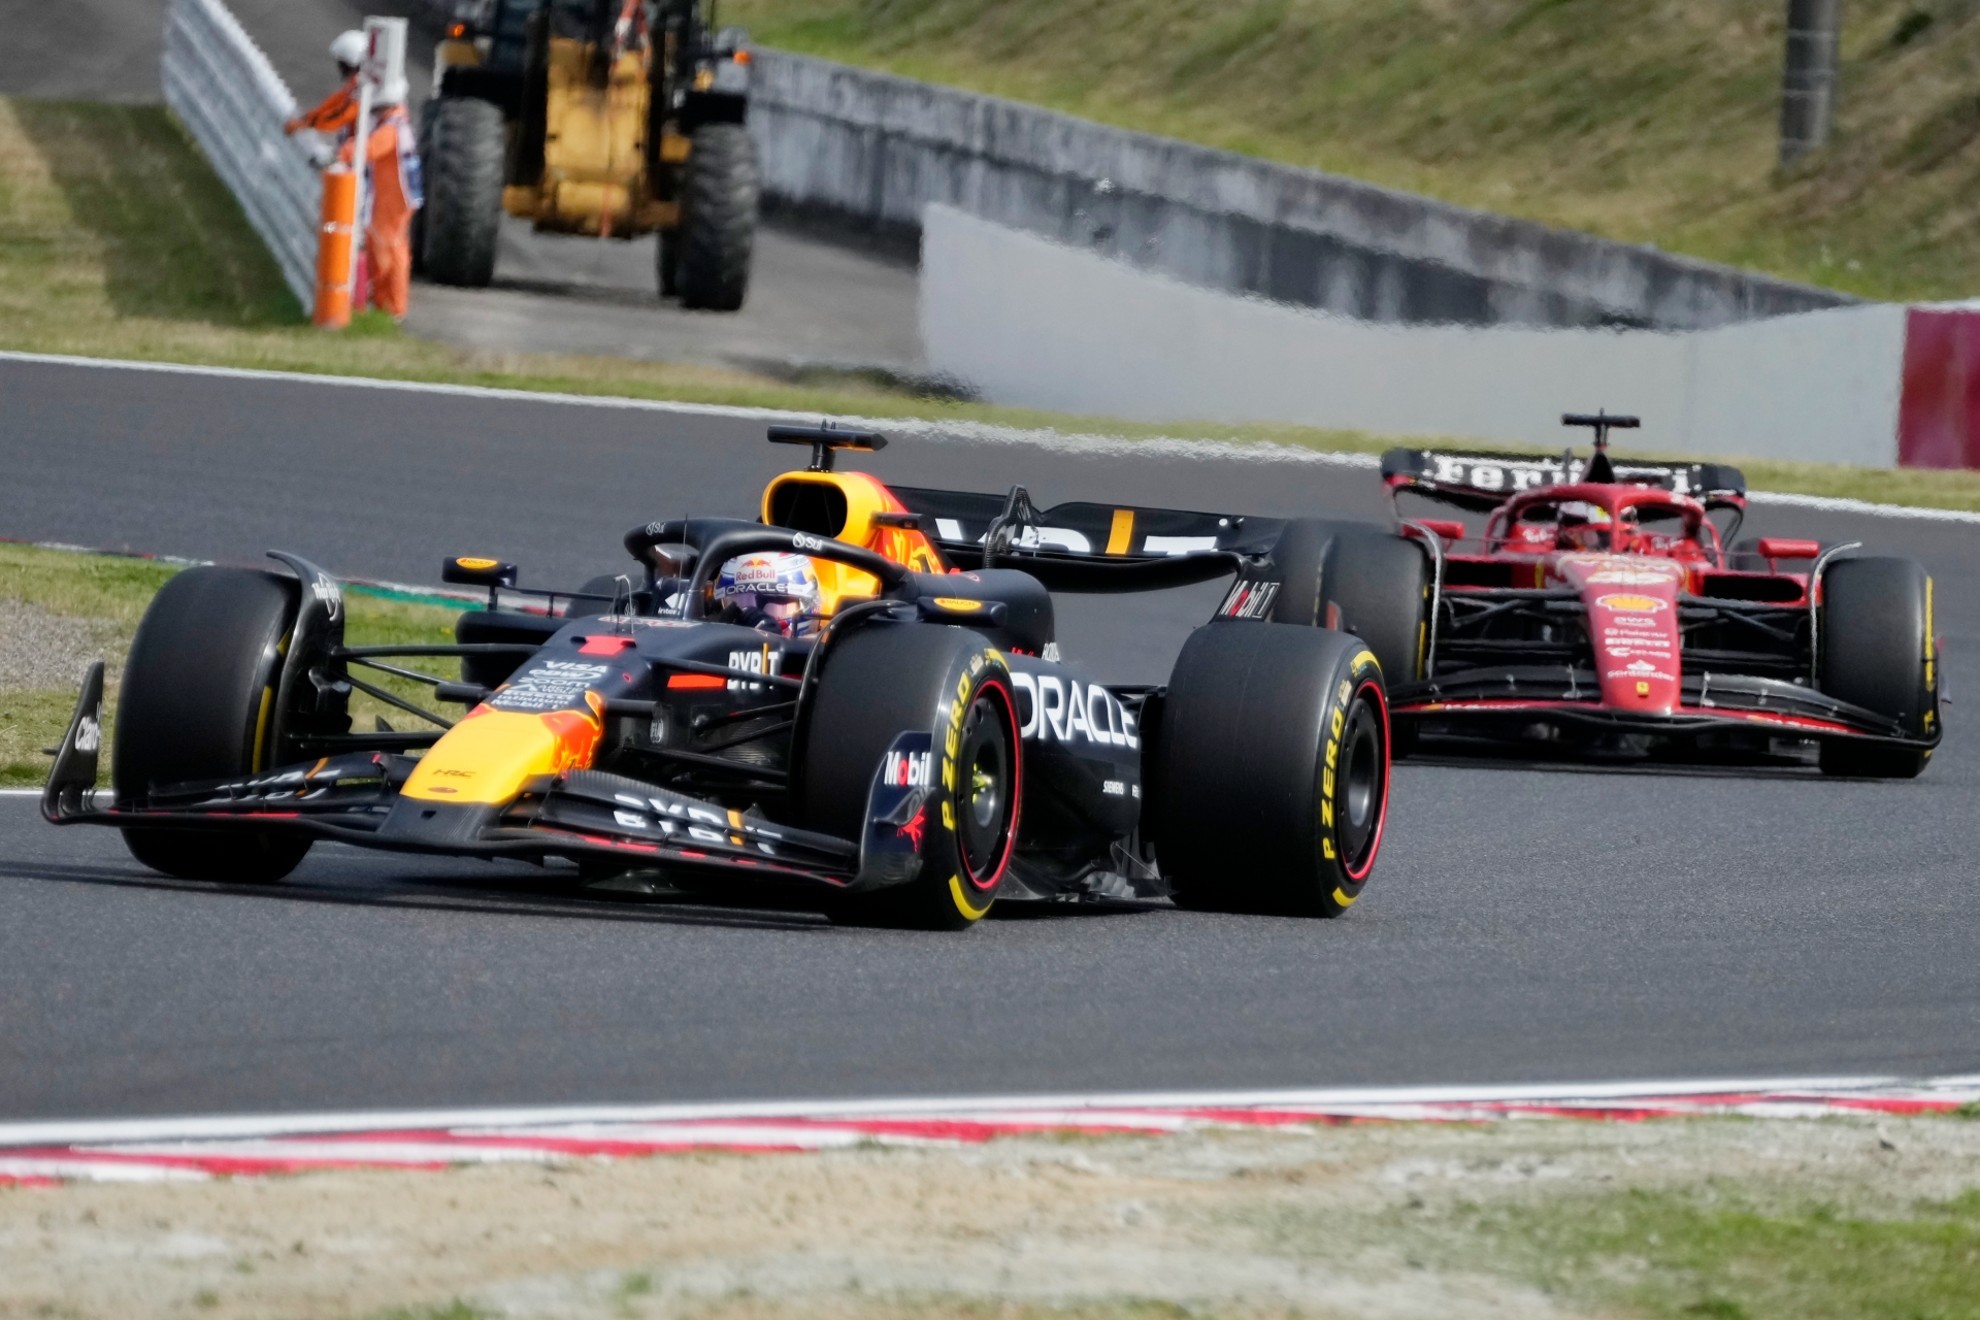 Verstappen bounces back with dominant win at Japanese Grand Prix